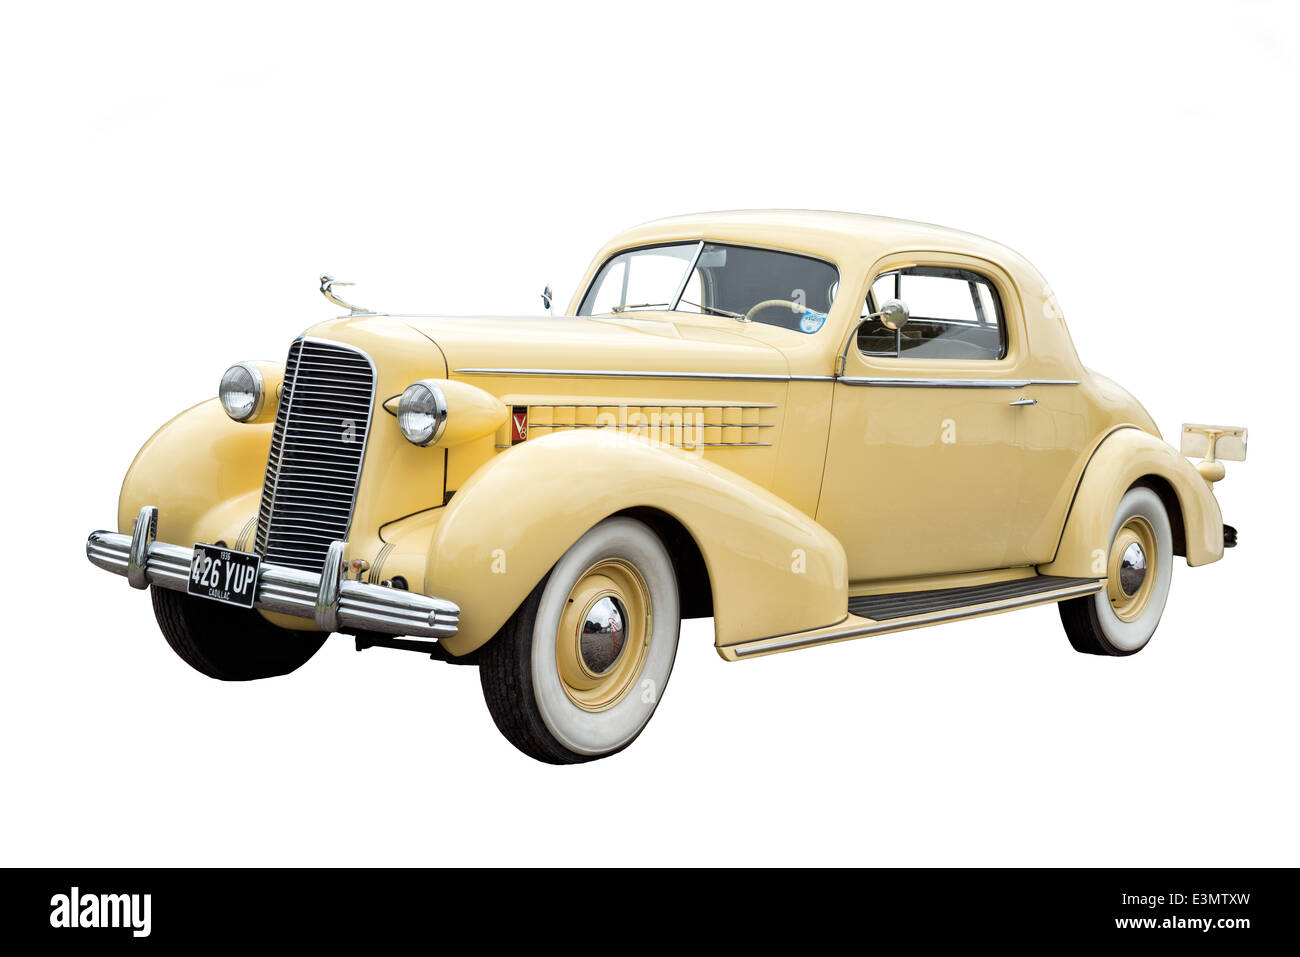 A cut out of a yellow 1936 Cadilac Fleetwood V8 Coupe classic American car Stock Photo